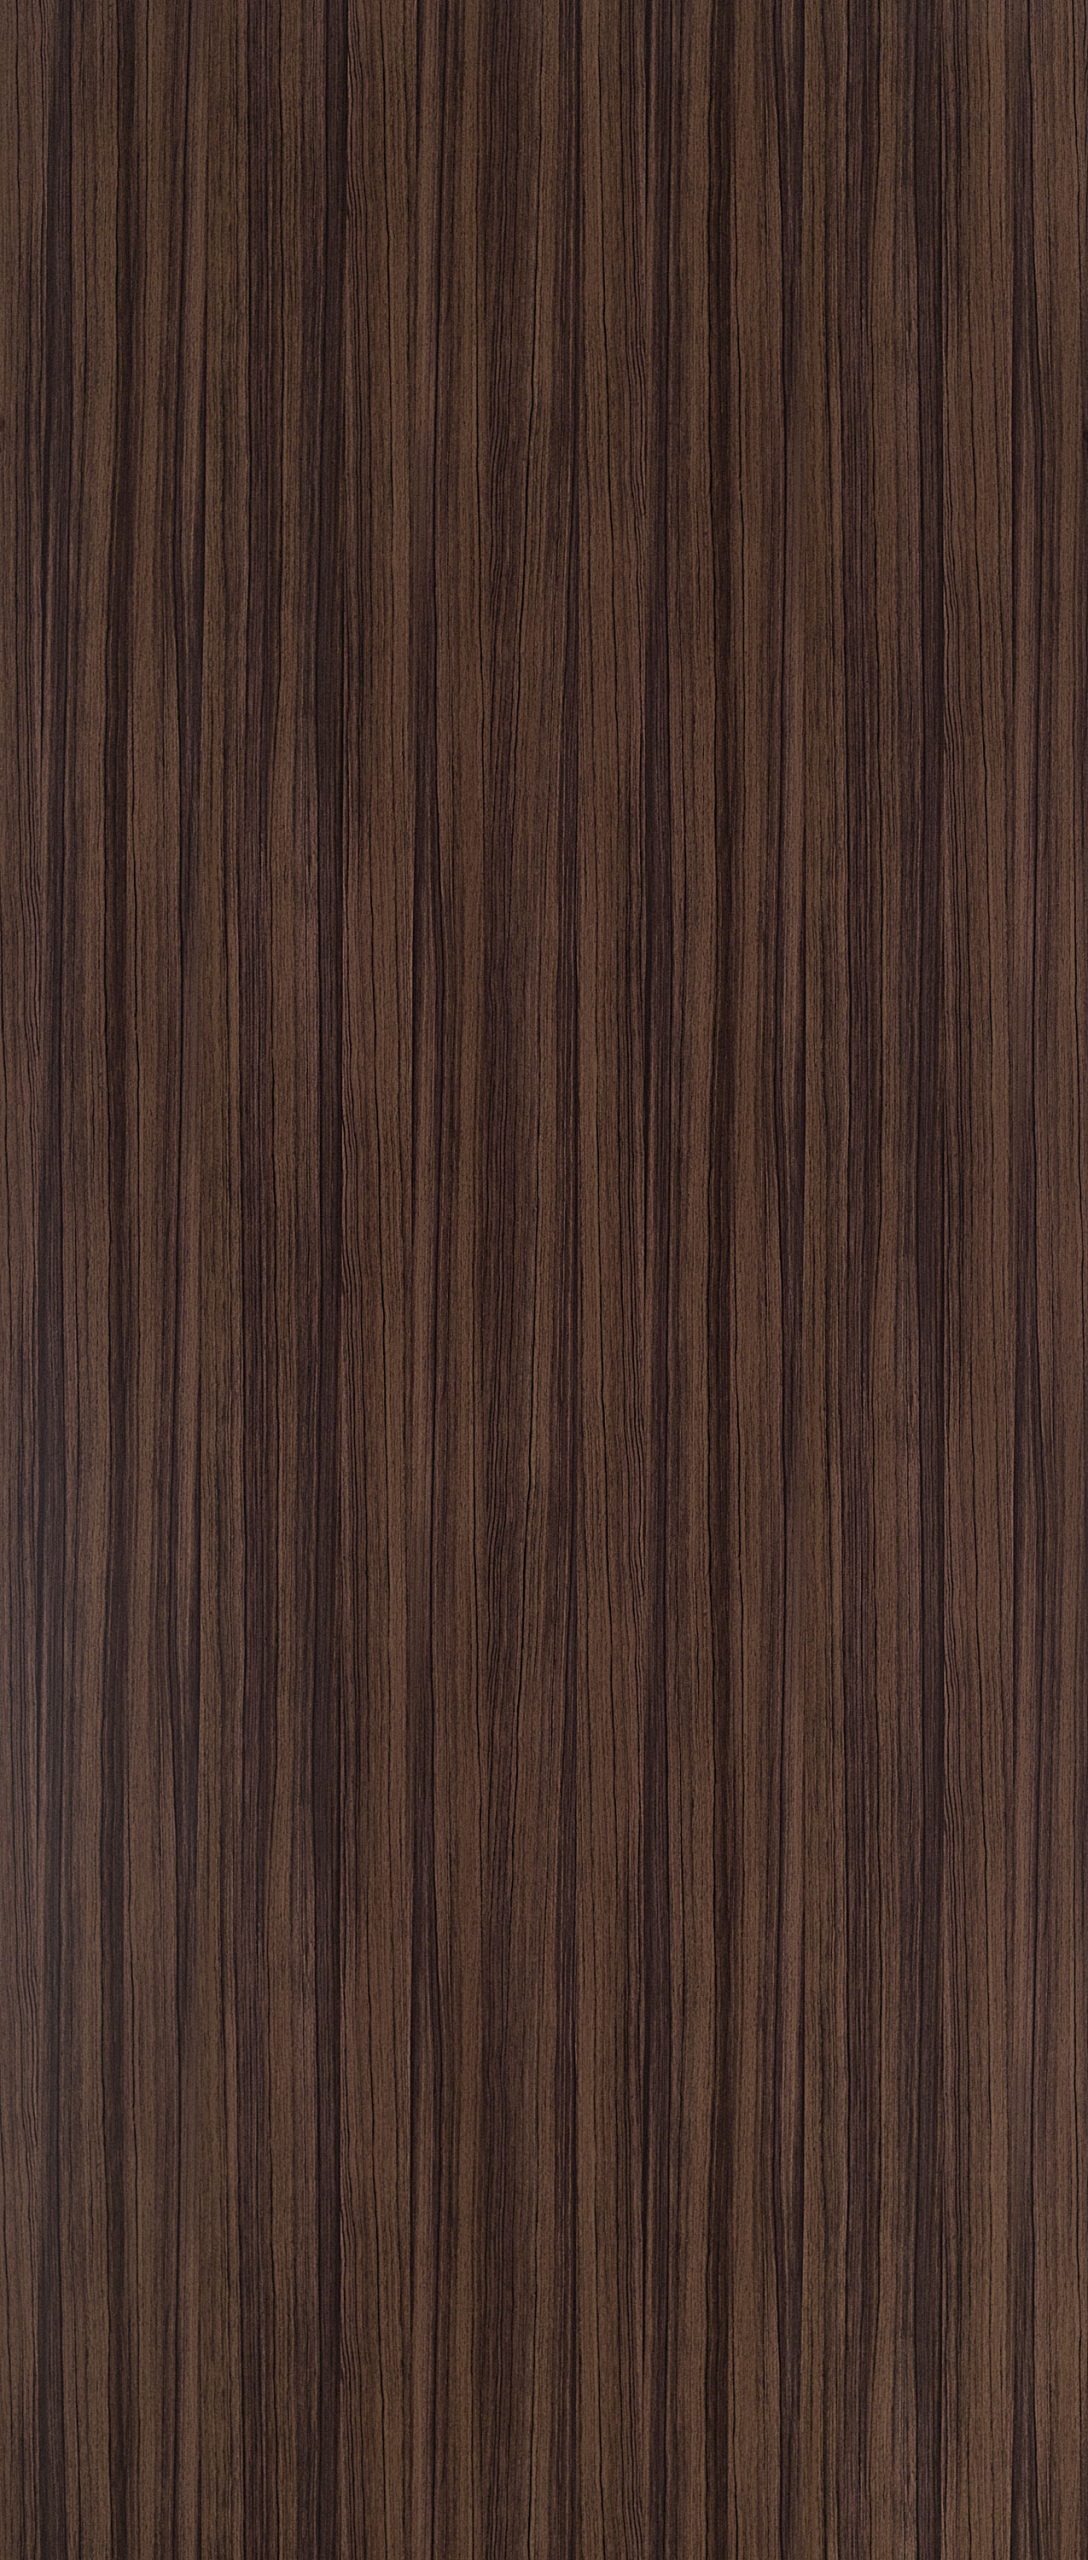 9103 Smoldered Wood (SUD) exterior wall cladding in India